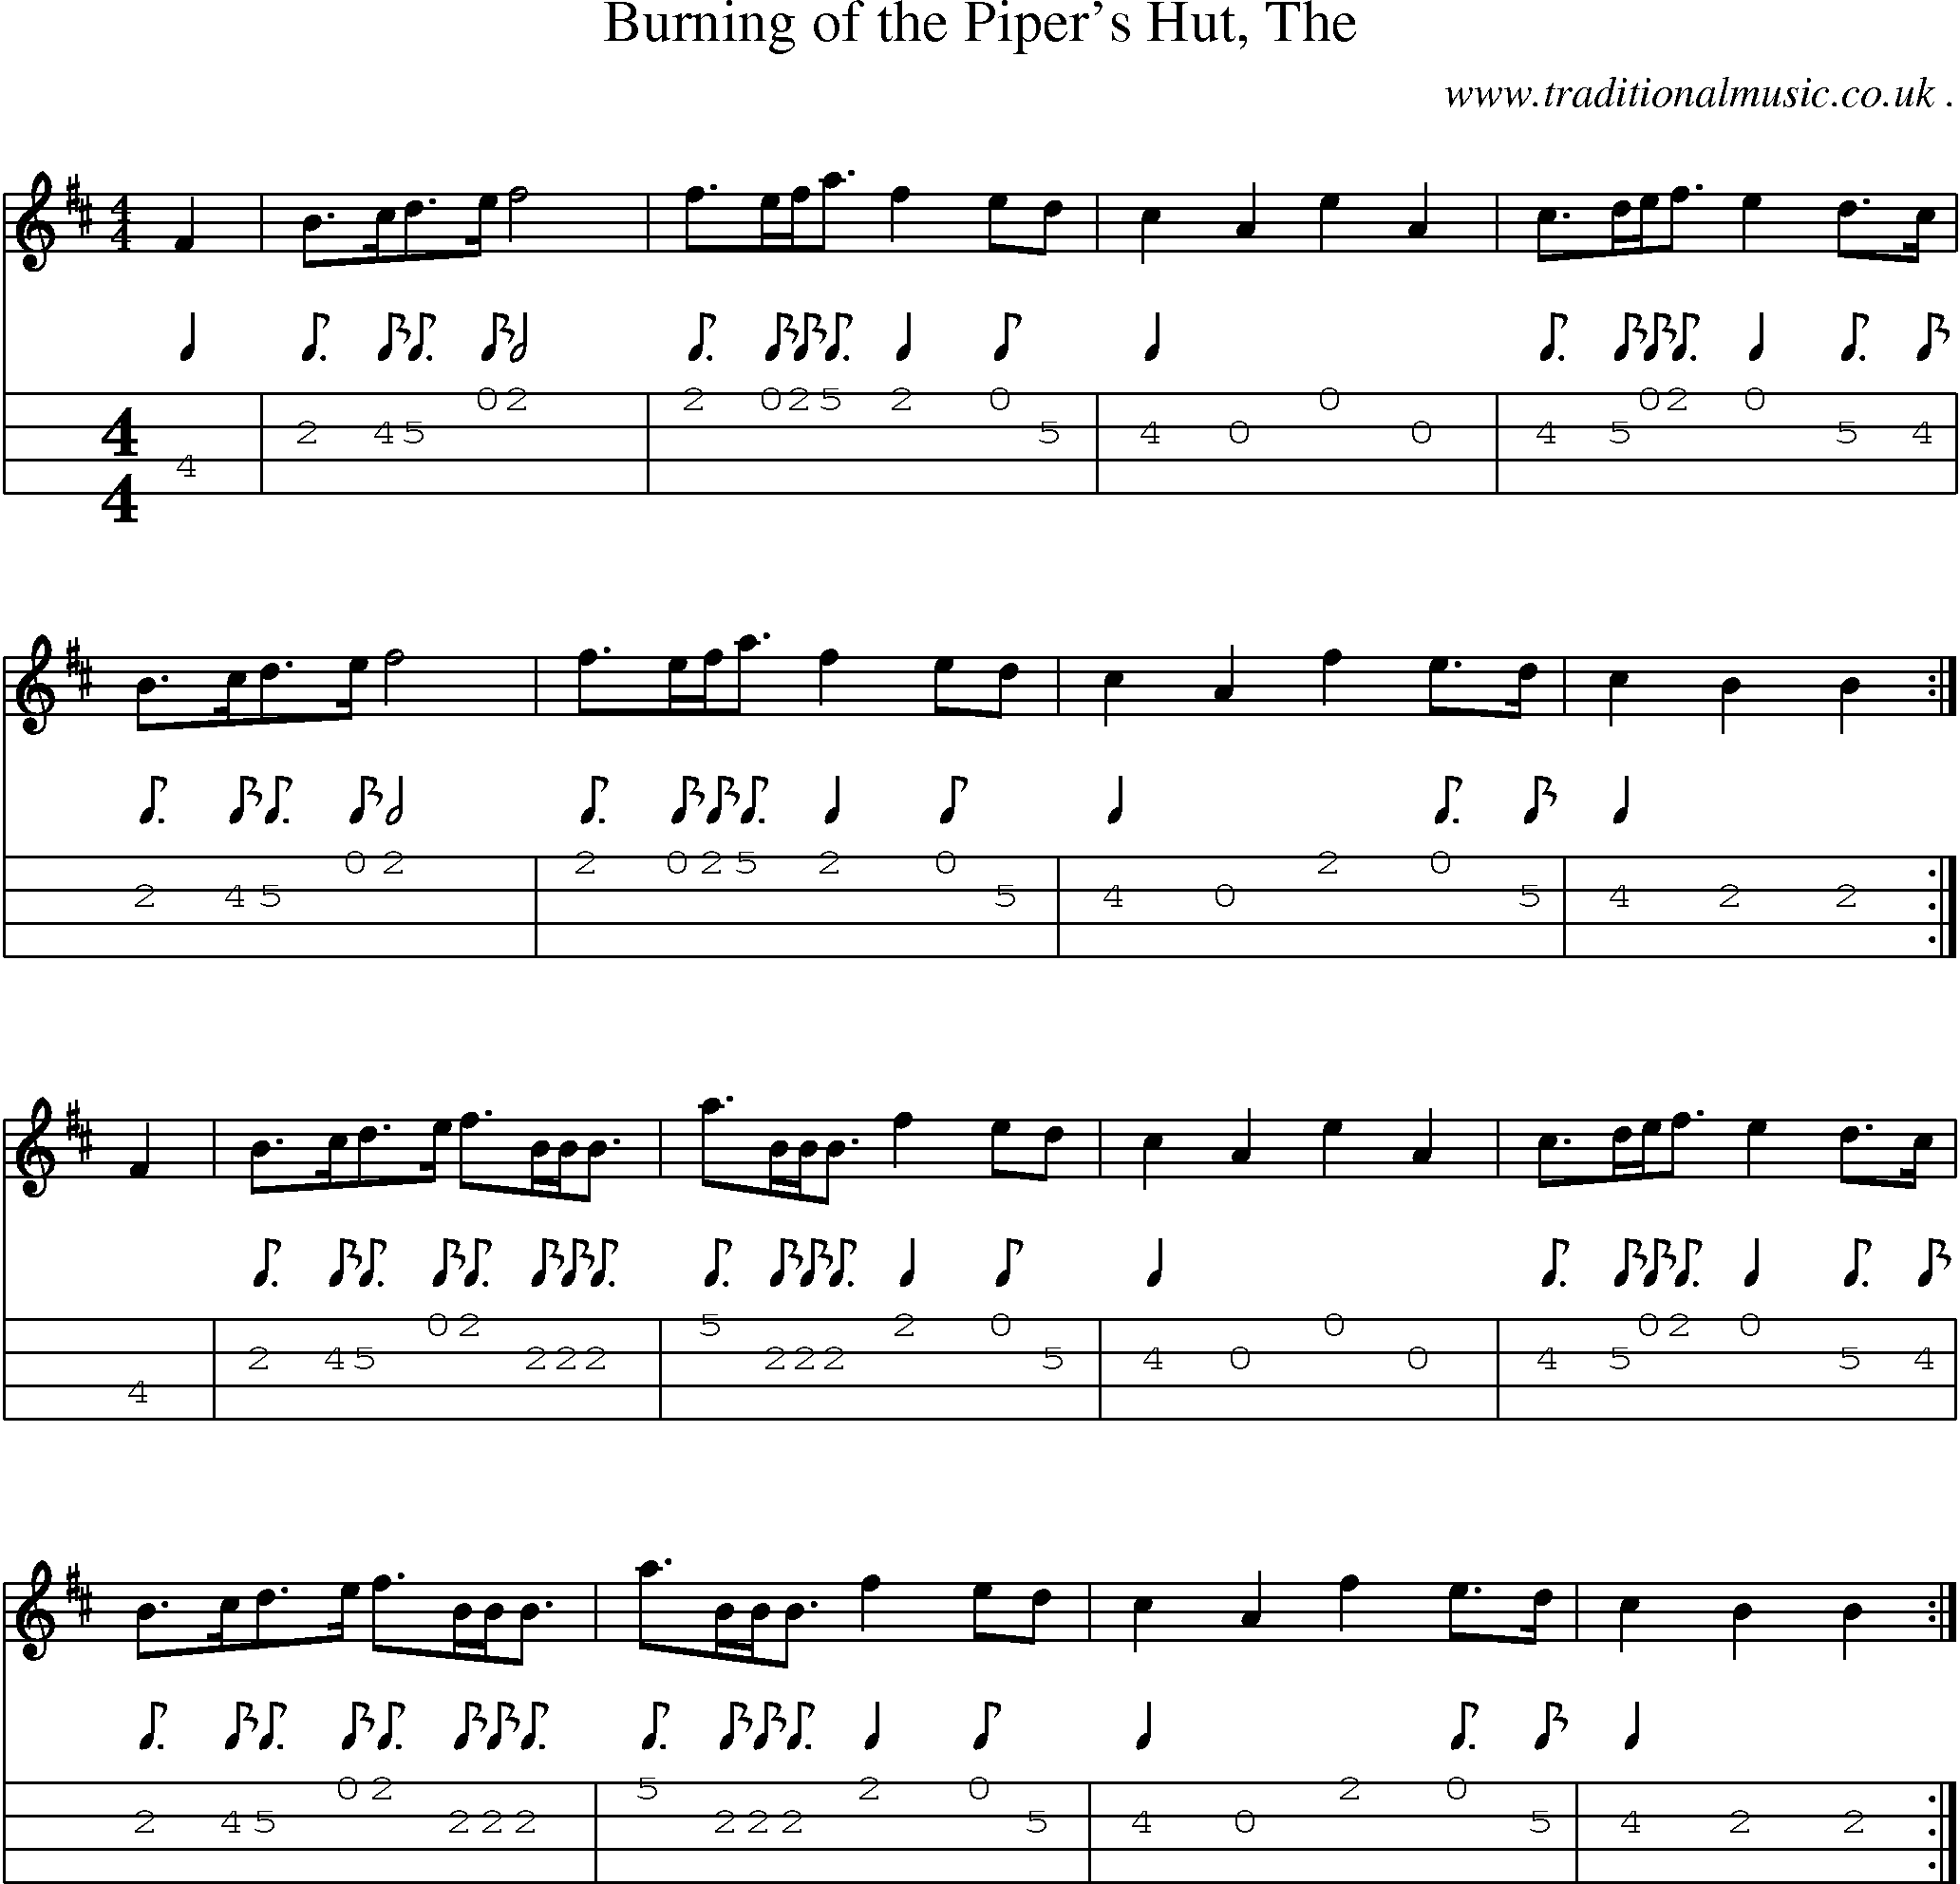 Sheet-music  score, Chords and Mandolin Tabs for Burning Of The Pipers Hut The